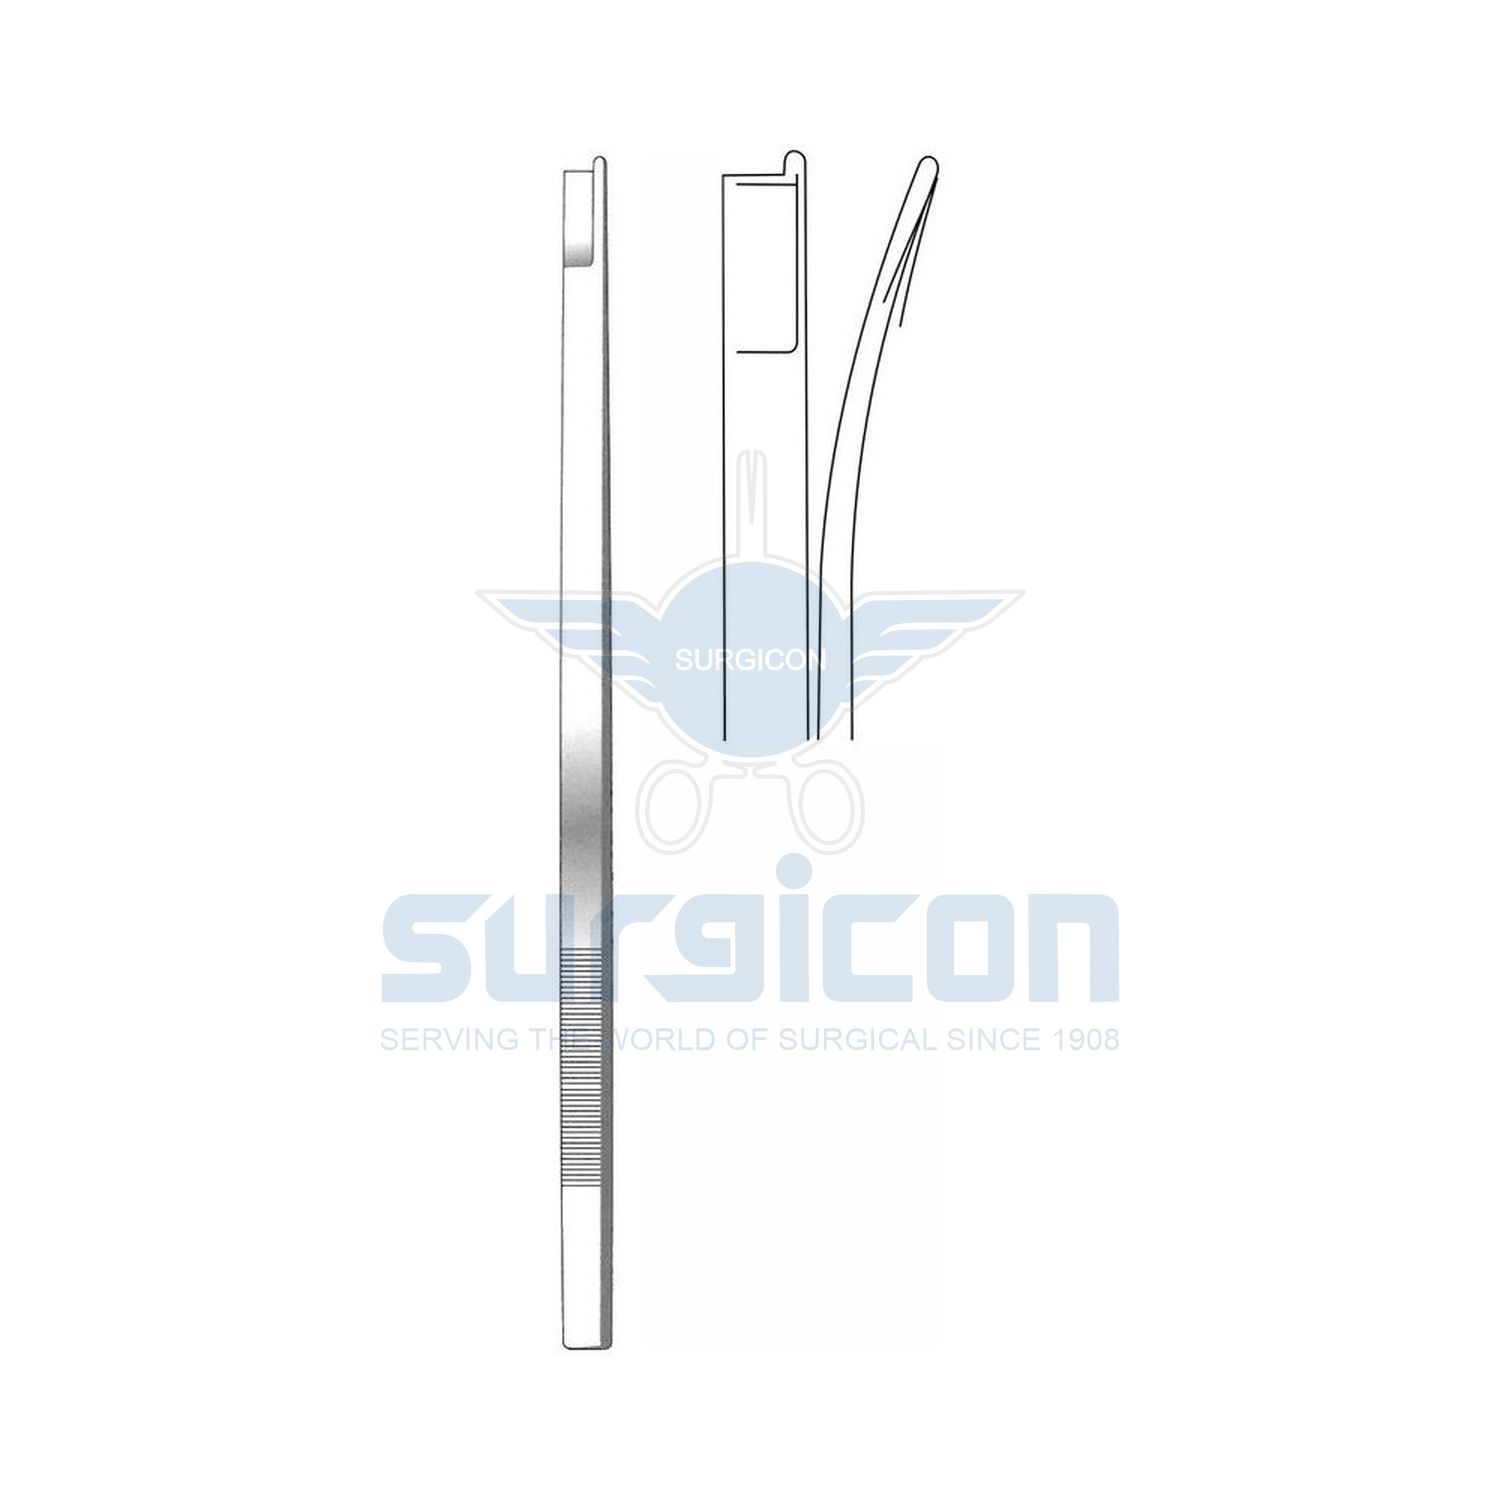 Neivert-Anderson-Osteotome,-Right-Curved-J-32-3670